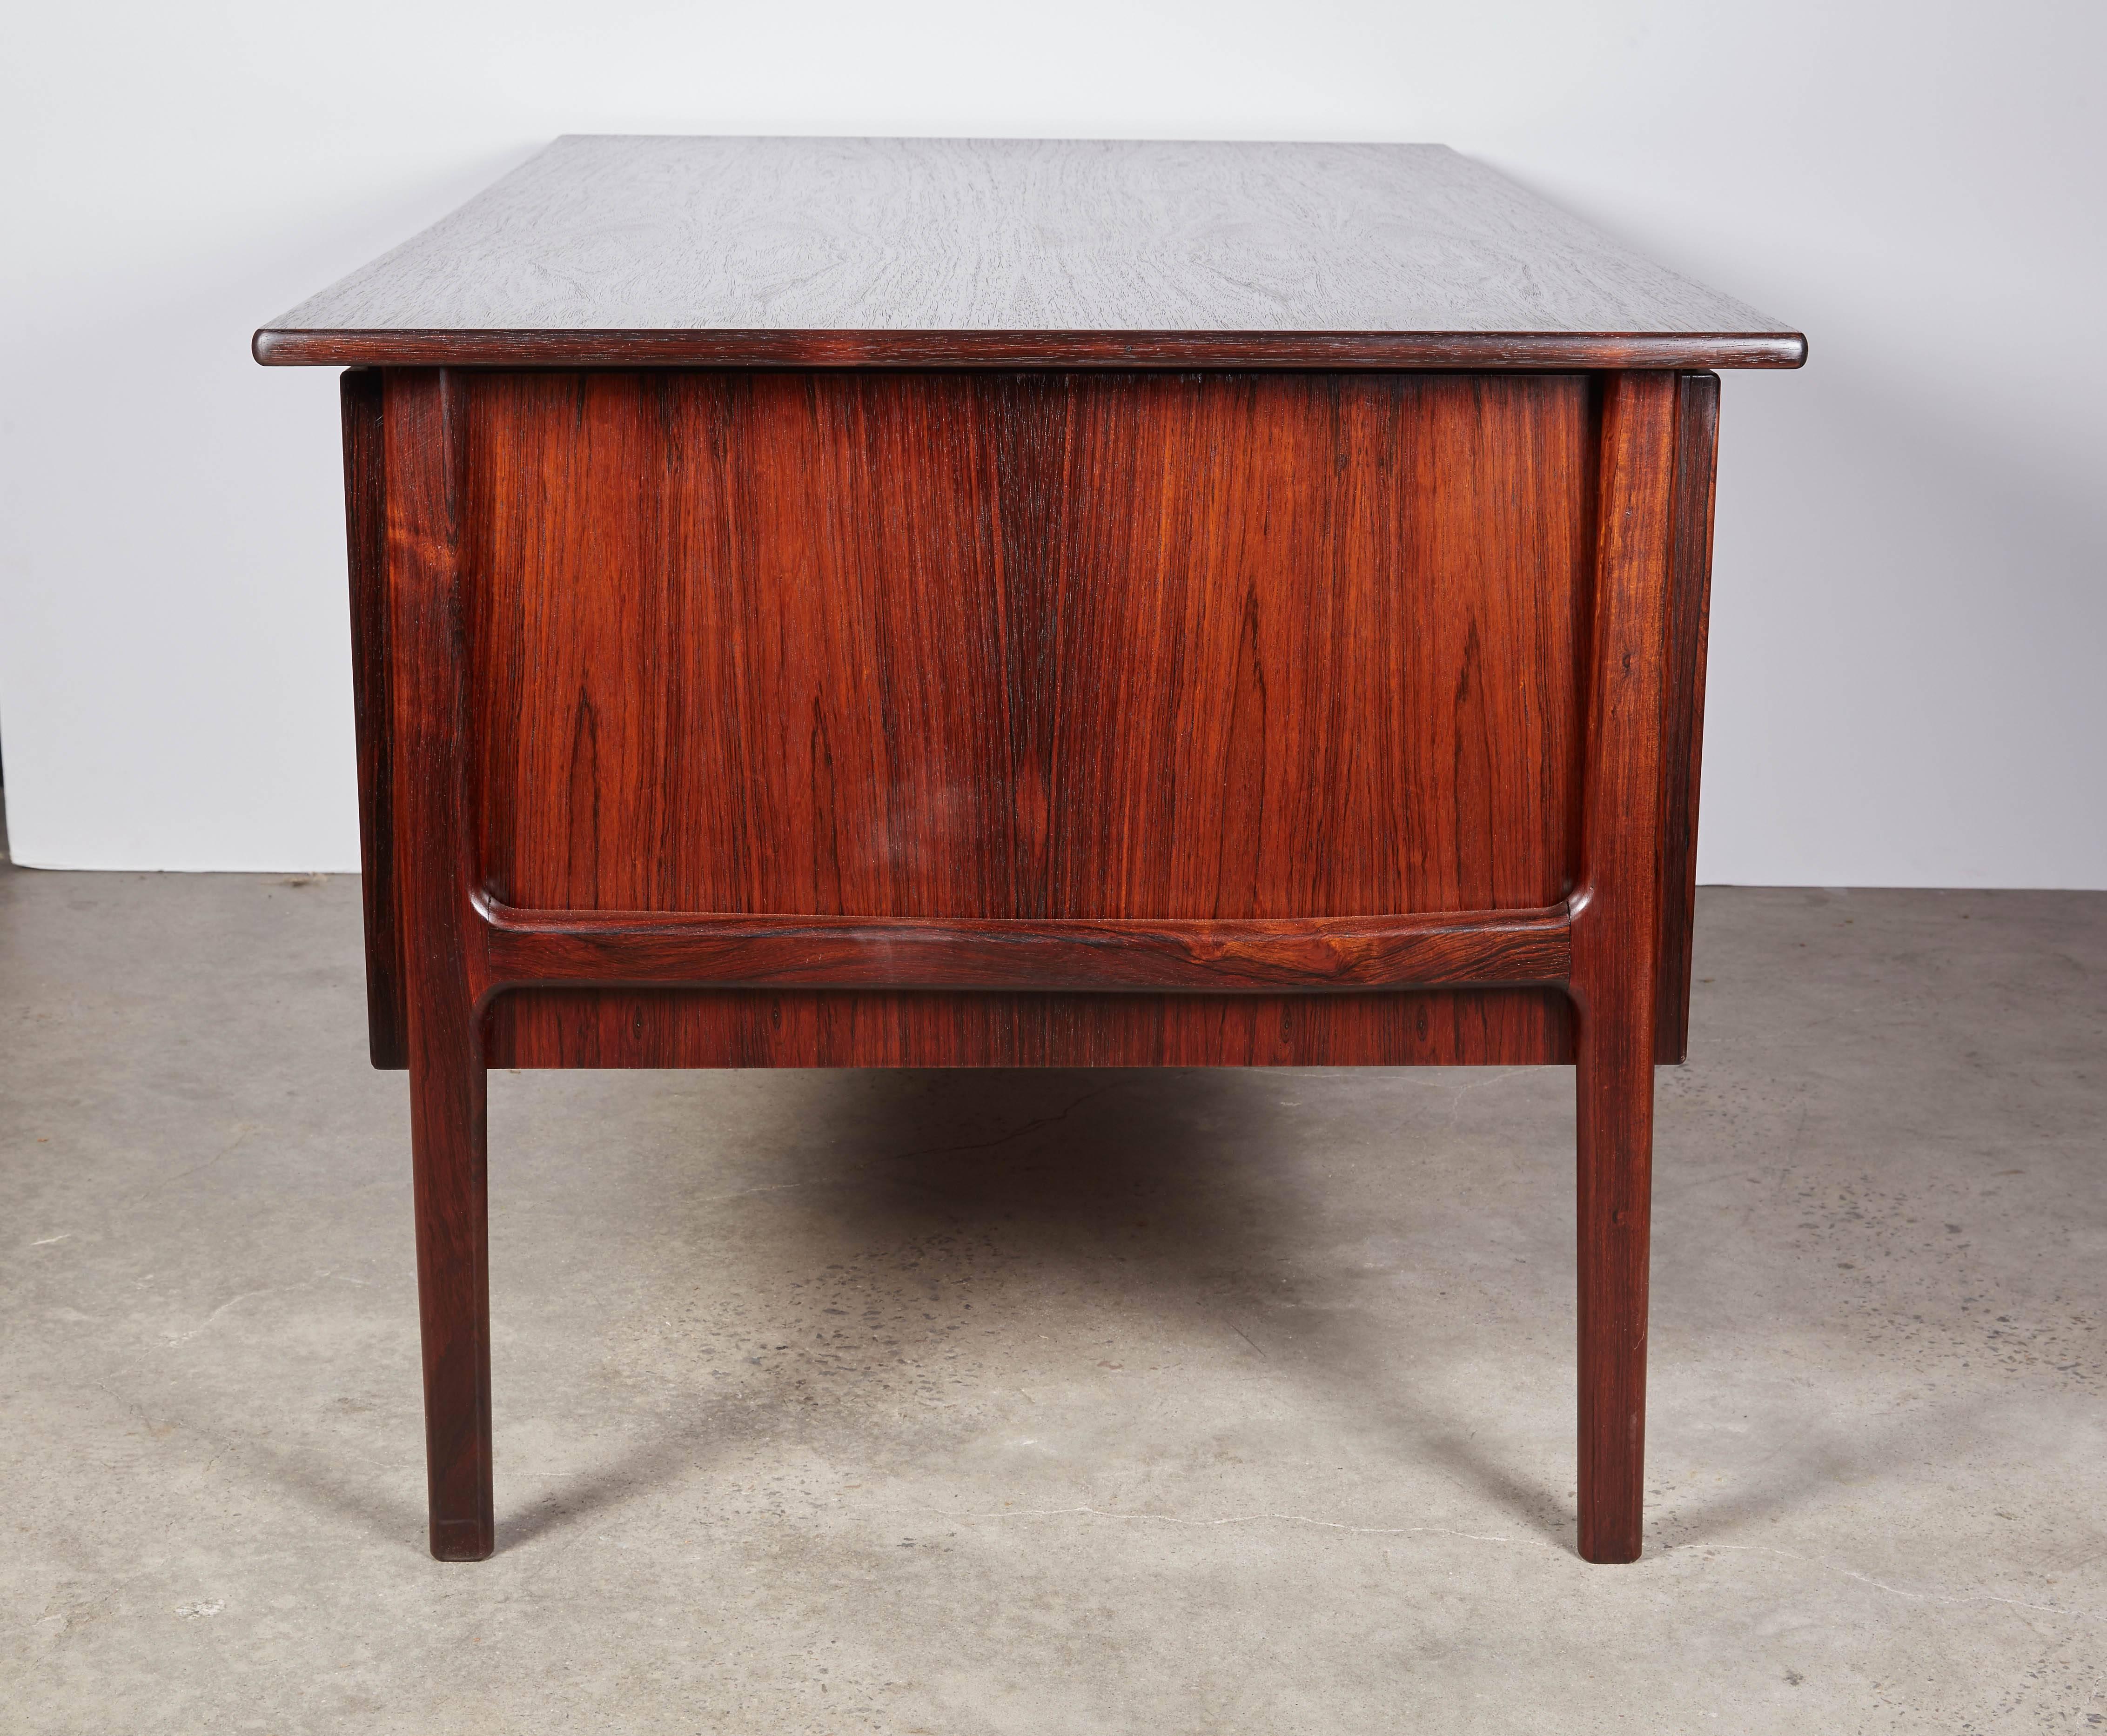 Omann Jun Rosewood Desk In Excellent Condition For Sale In New York, NY